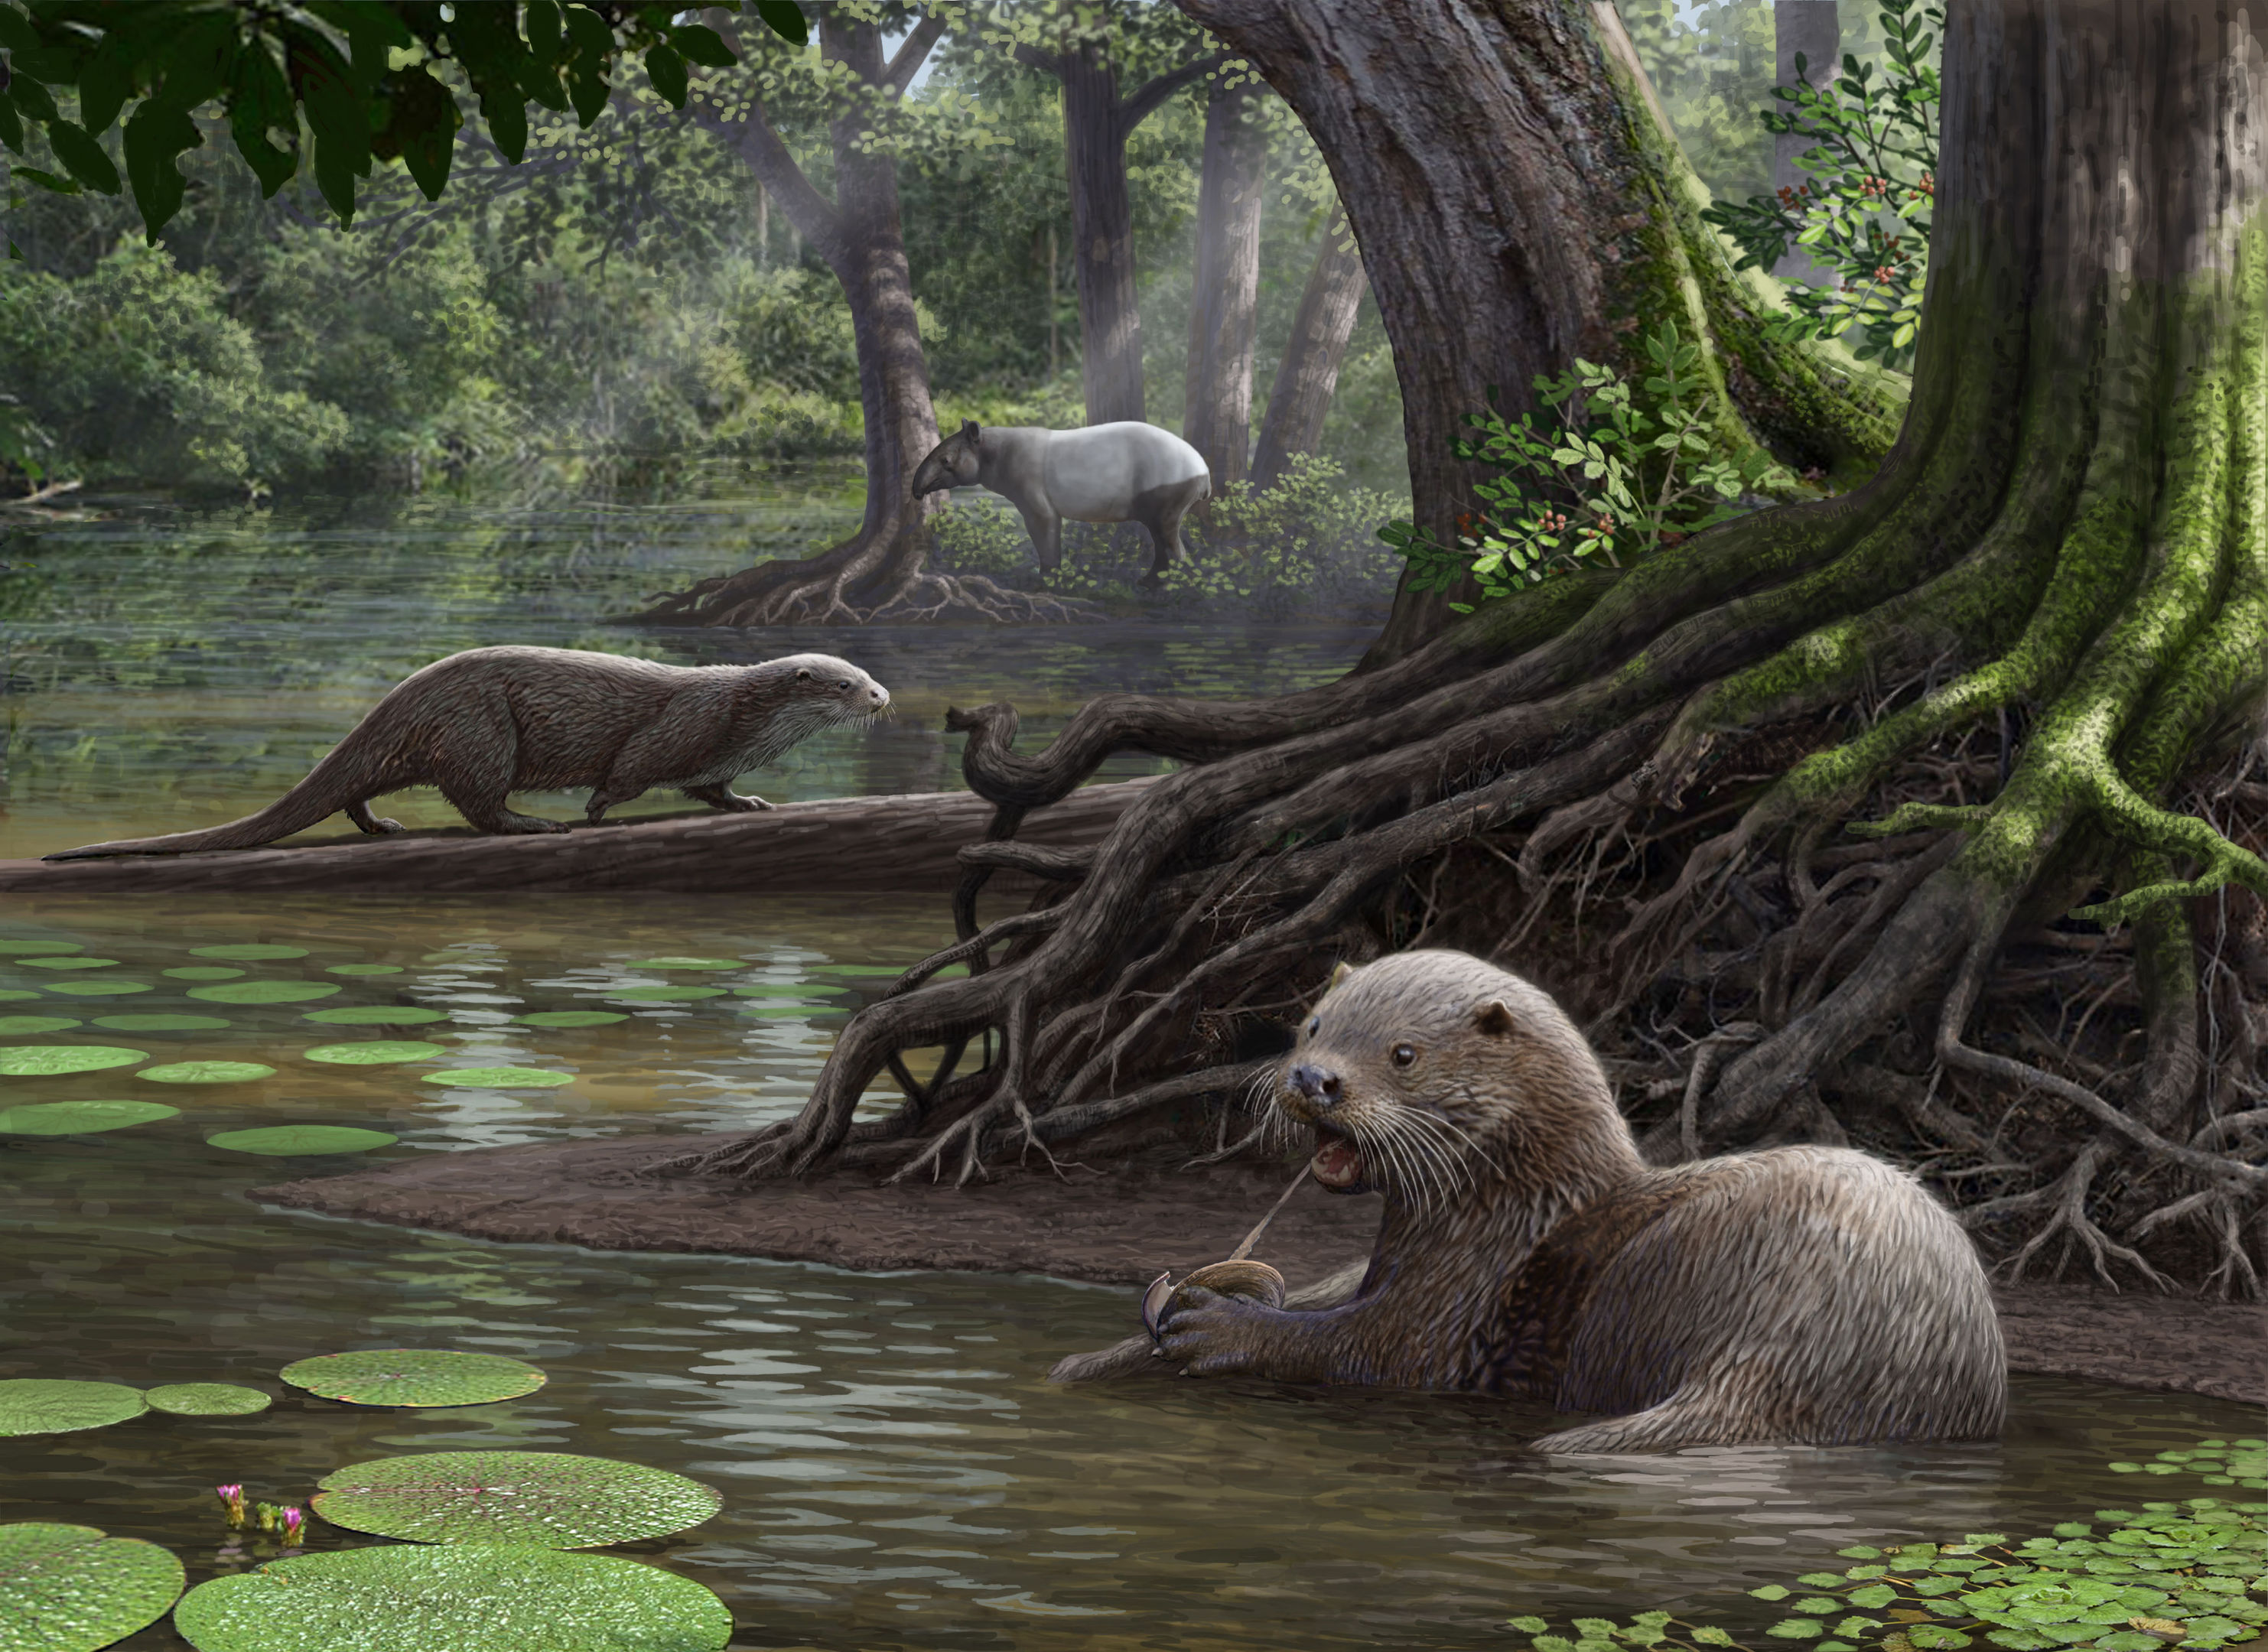 Artist's impression by Mauricio Anton issued by the University of New York at Buffalo of the top-predator prehistoric otter Siamogale melilutra, which was the size of a wolf. (Mauricio Anton/PA Wire)